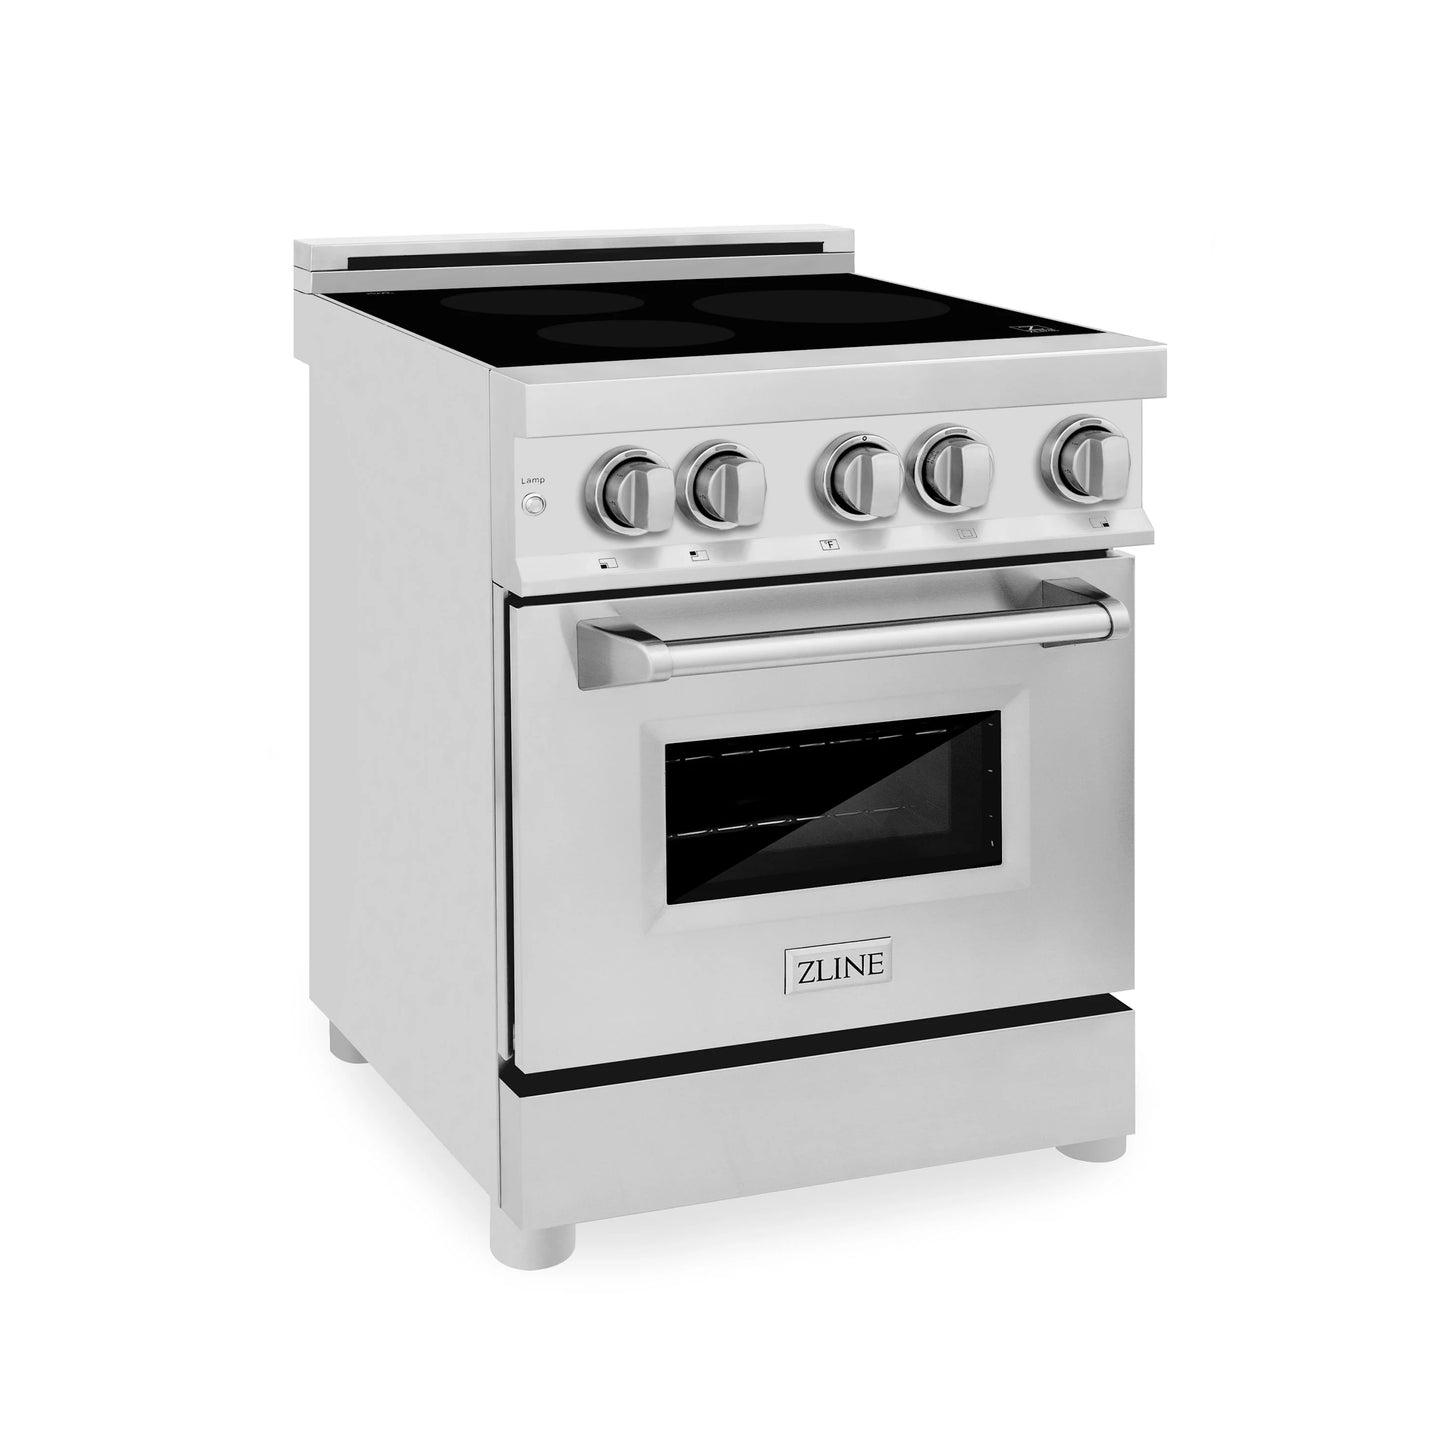 ZLINE 24 in. Induction Range with a 3 Element Stove and Electric Oven in Stainless Steel (RAIND-24)